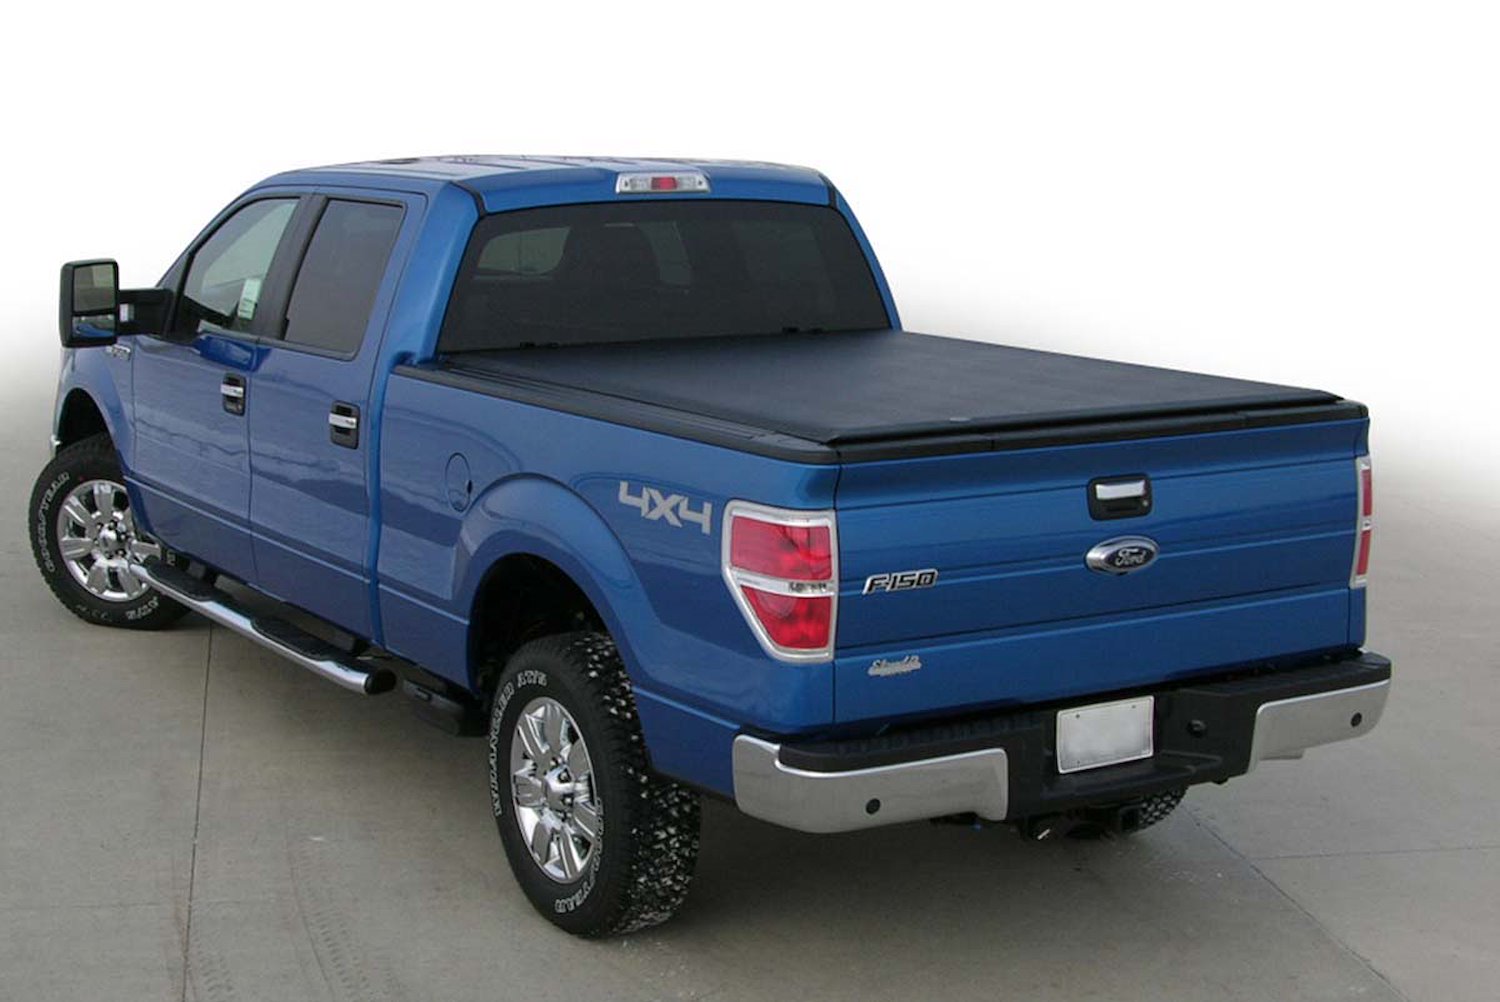 LORADO Roll-Up Tonneau Cover, Fits Select Toyota Tundra, with 6 ft. 6 in. Bed w/Deck Rail